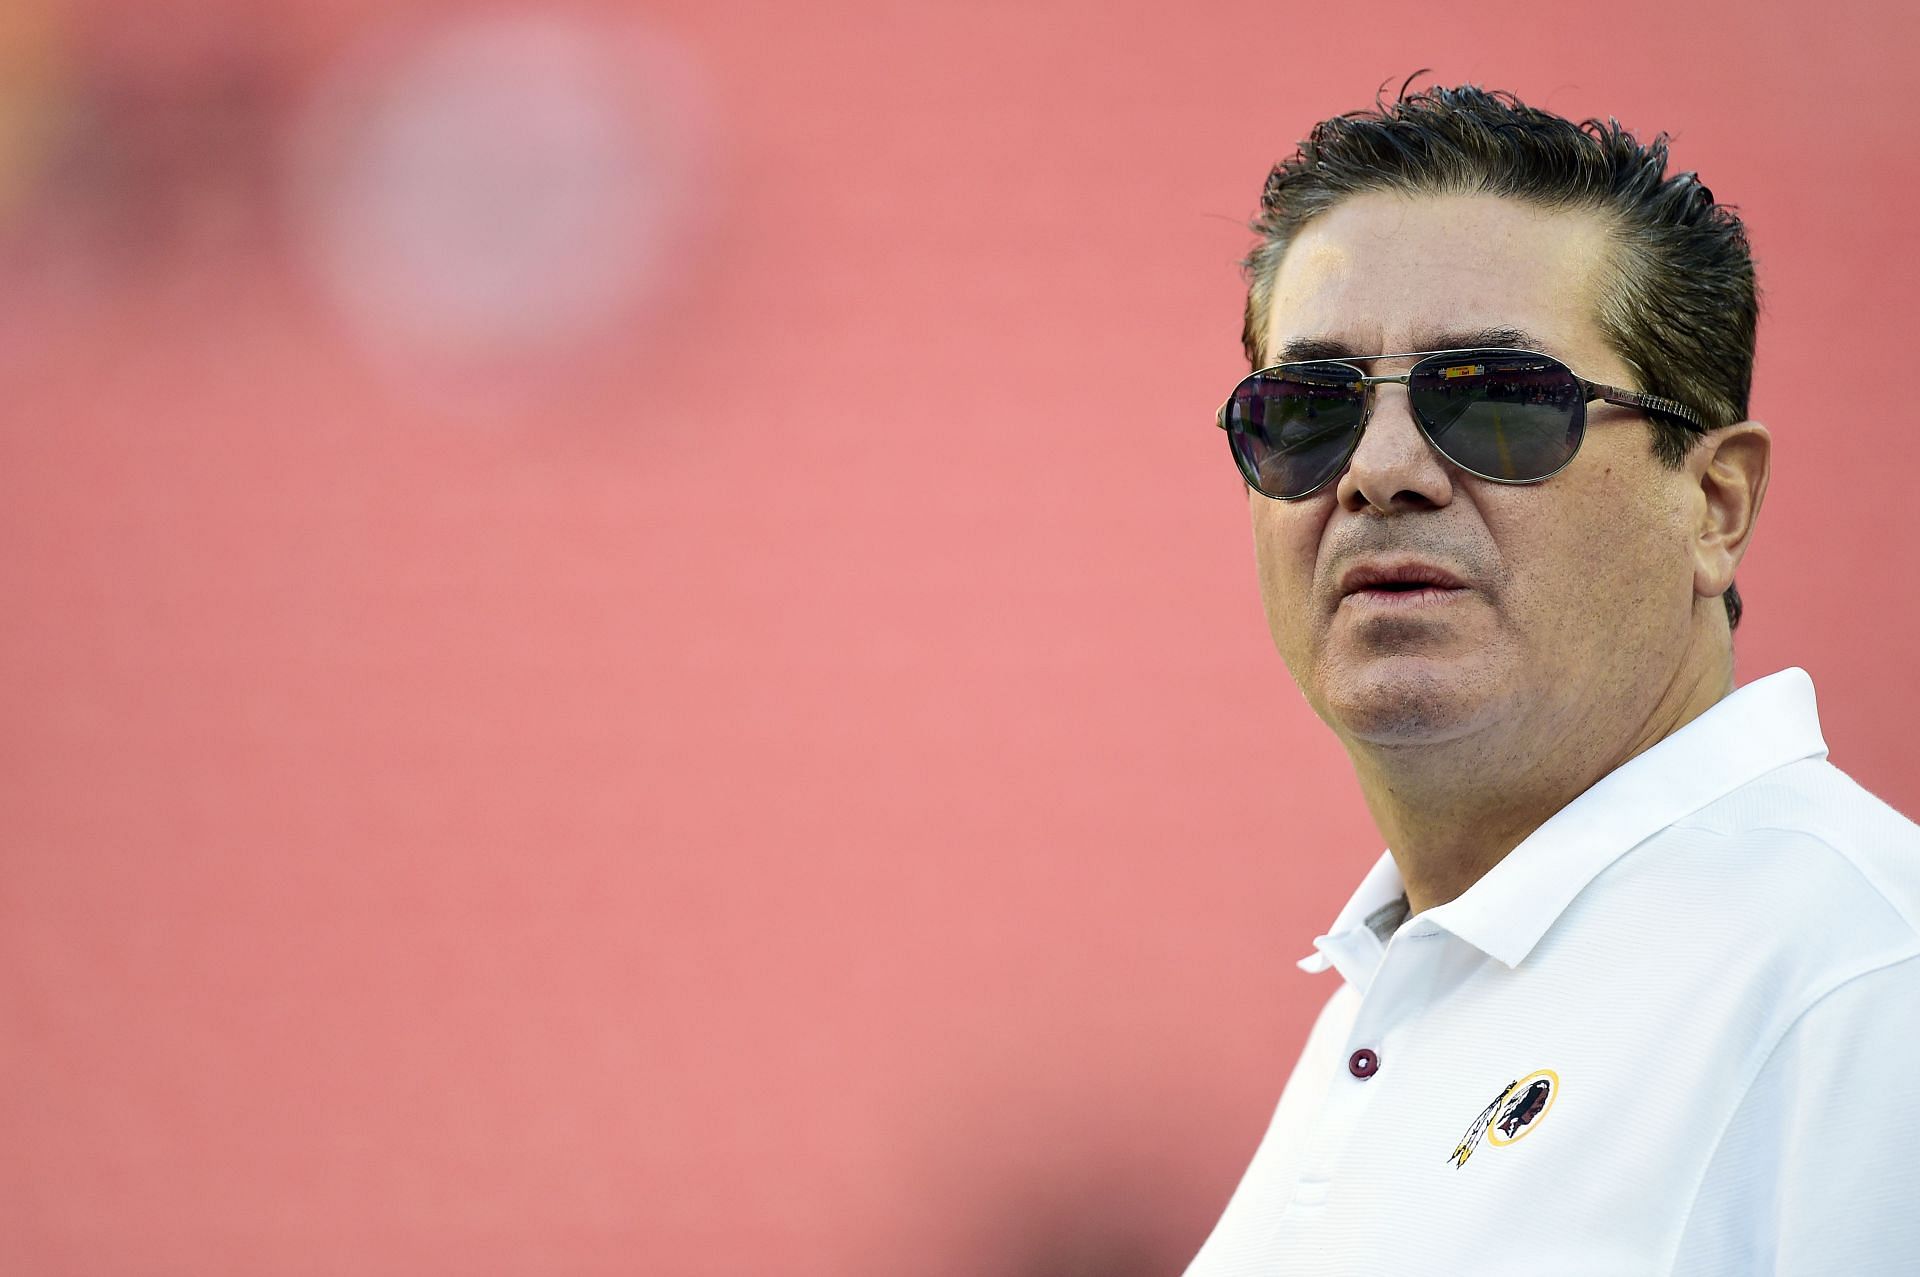 What did Dan Snyder do?